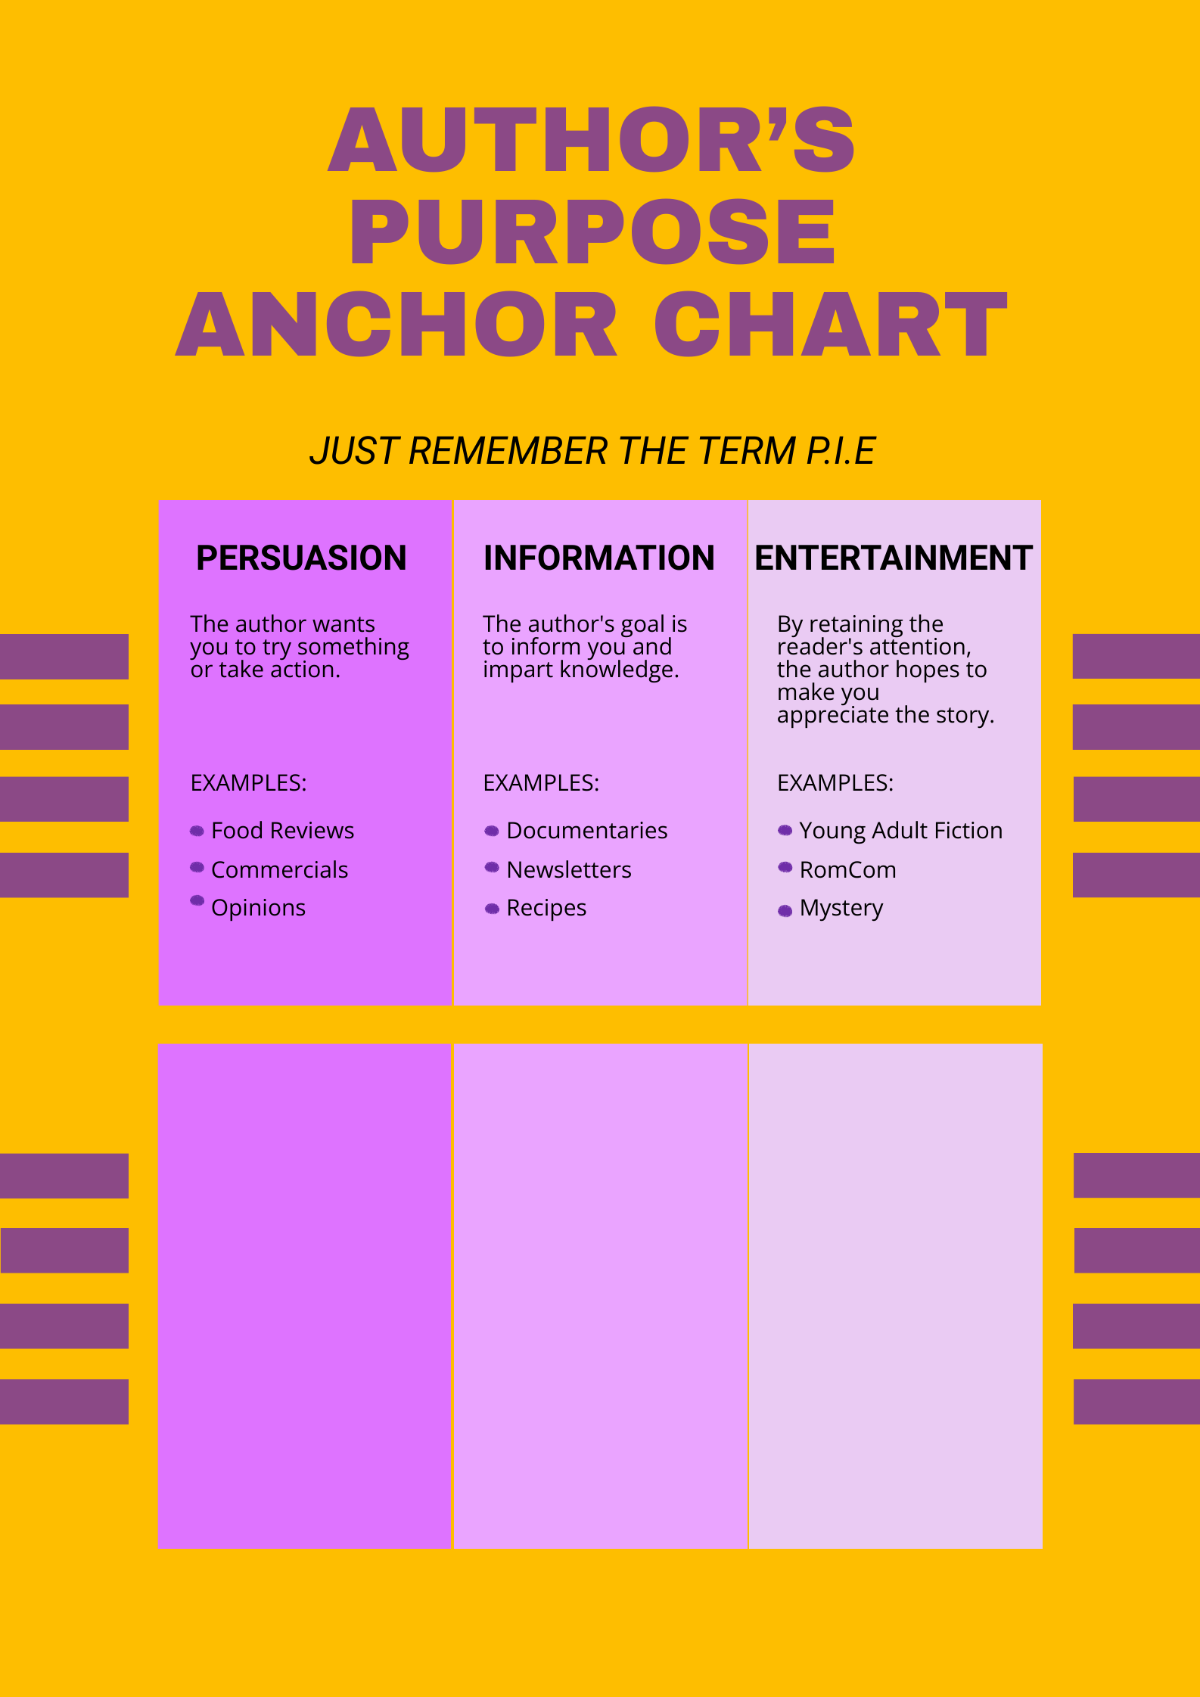 Author's Purpose anchor chart Template